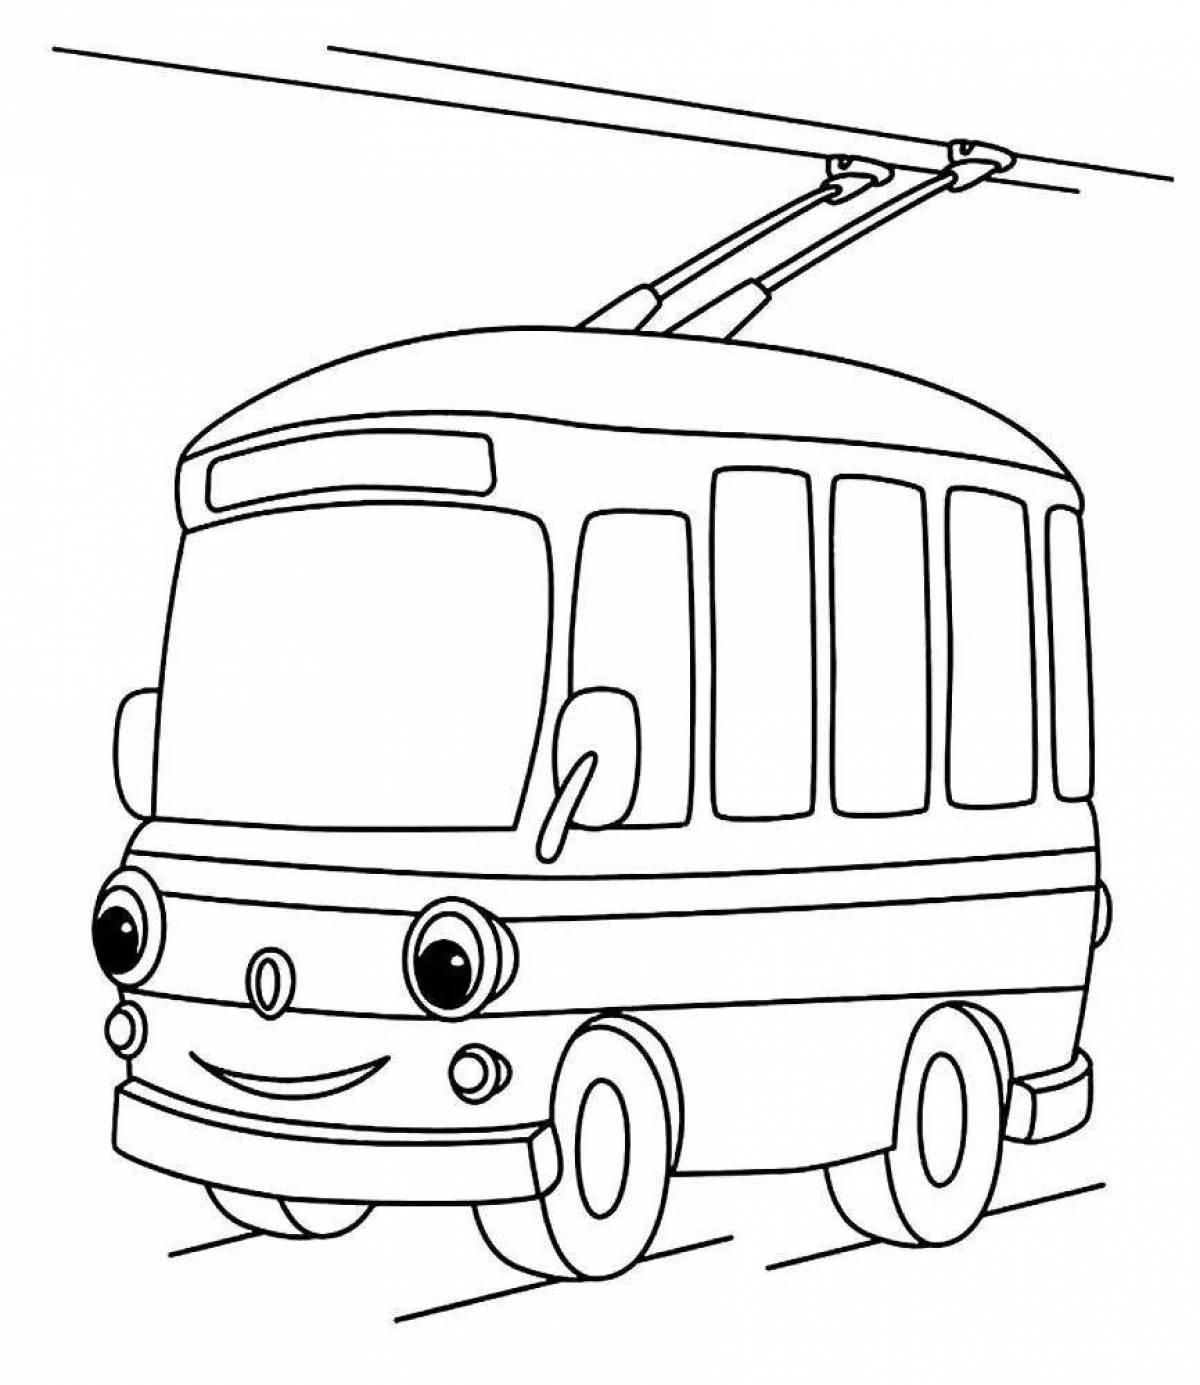 Coloring page funny land transport